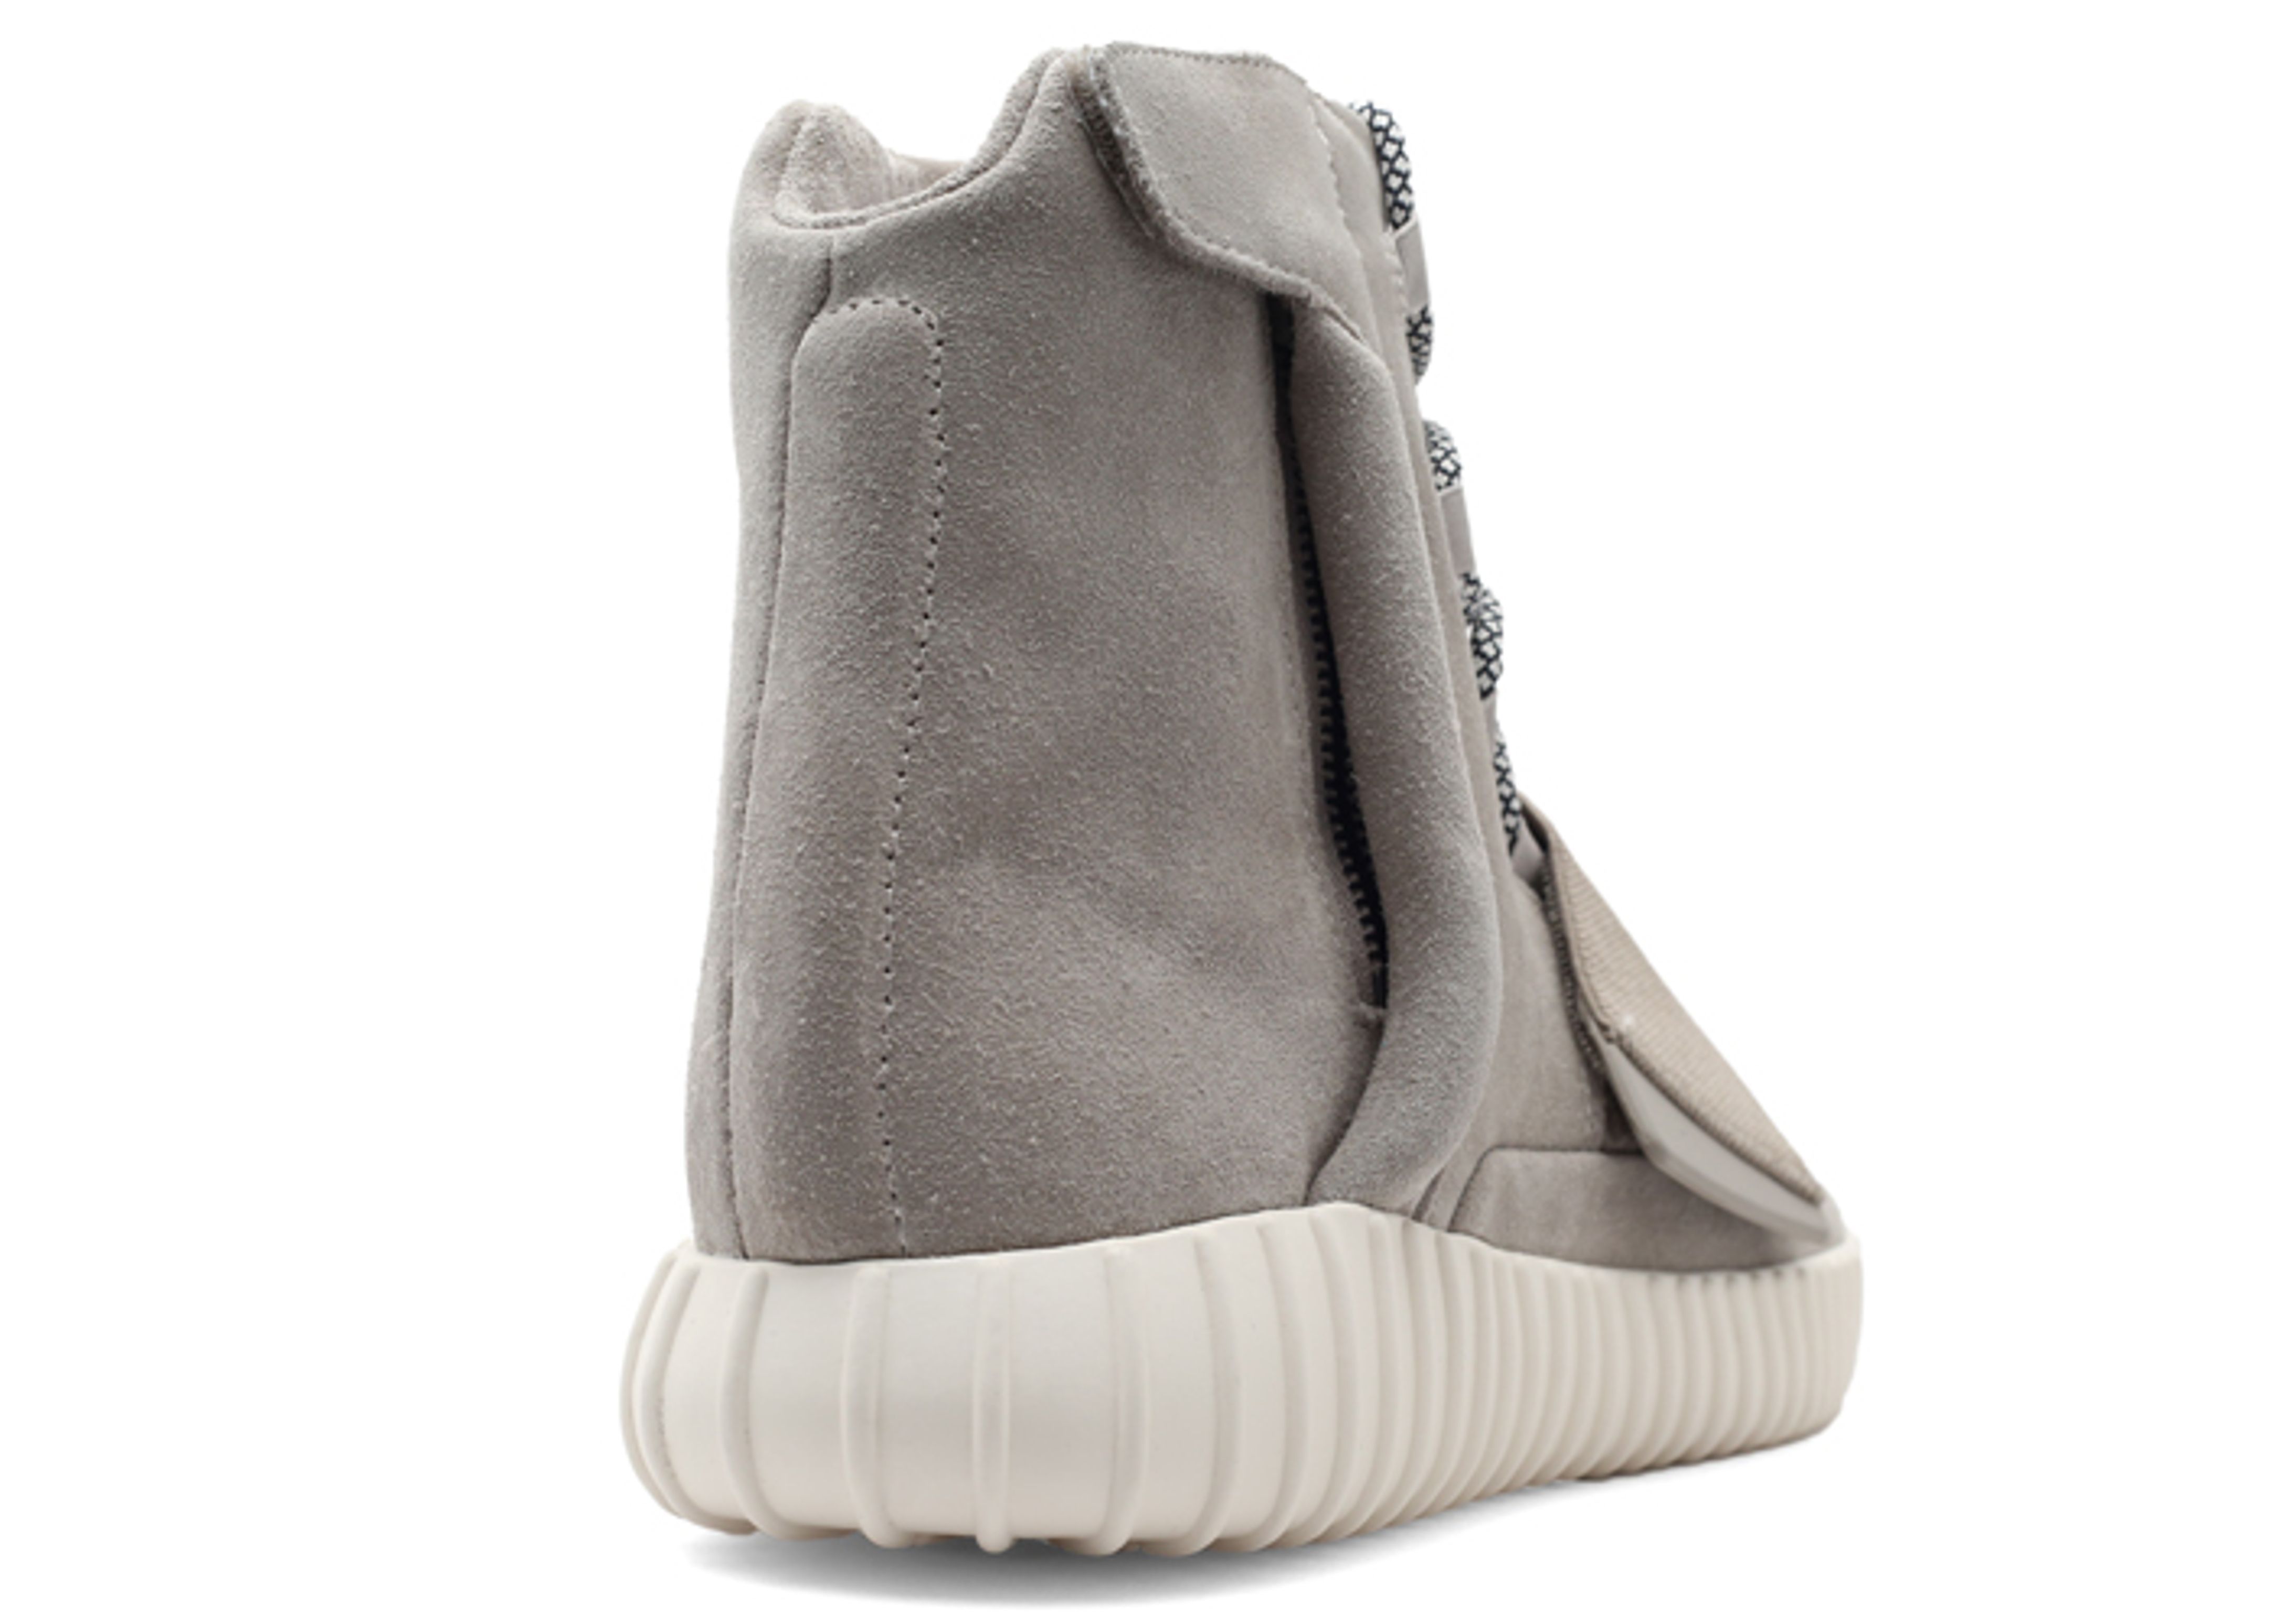 yeezy boost 750 for sale